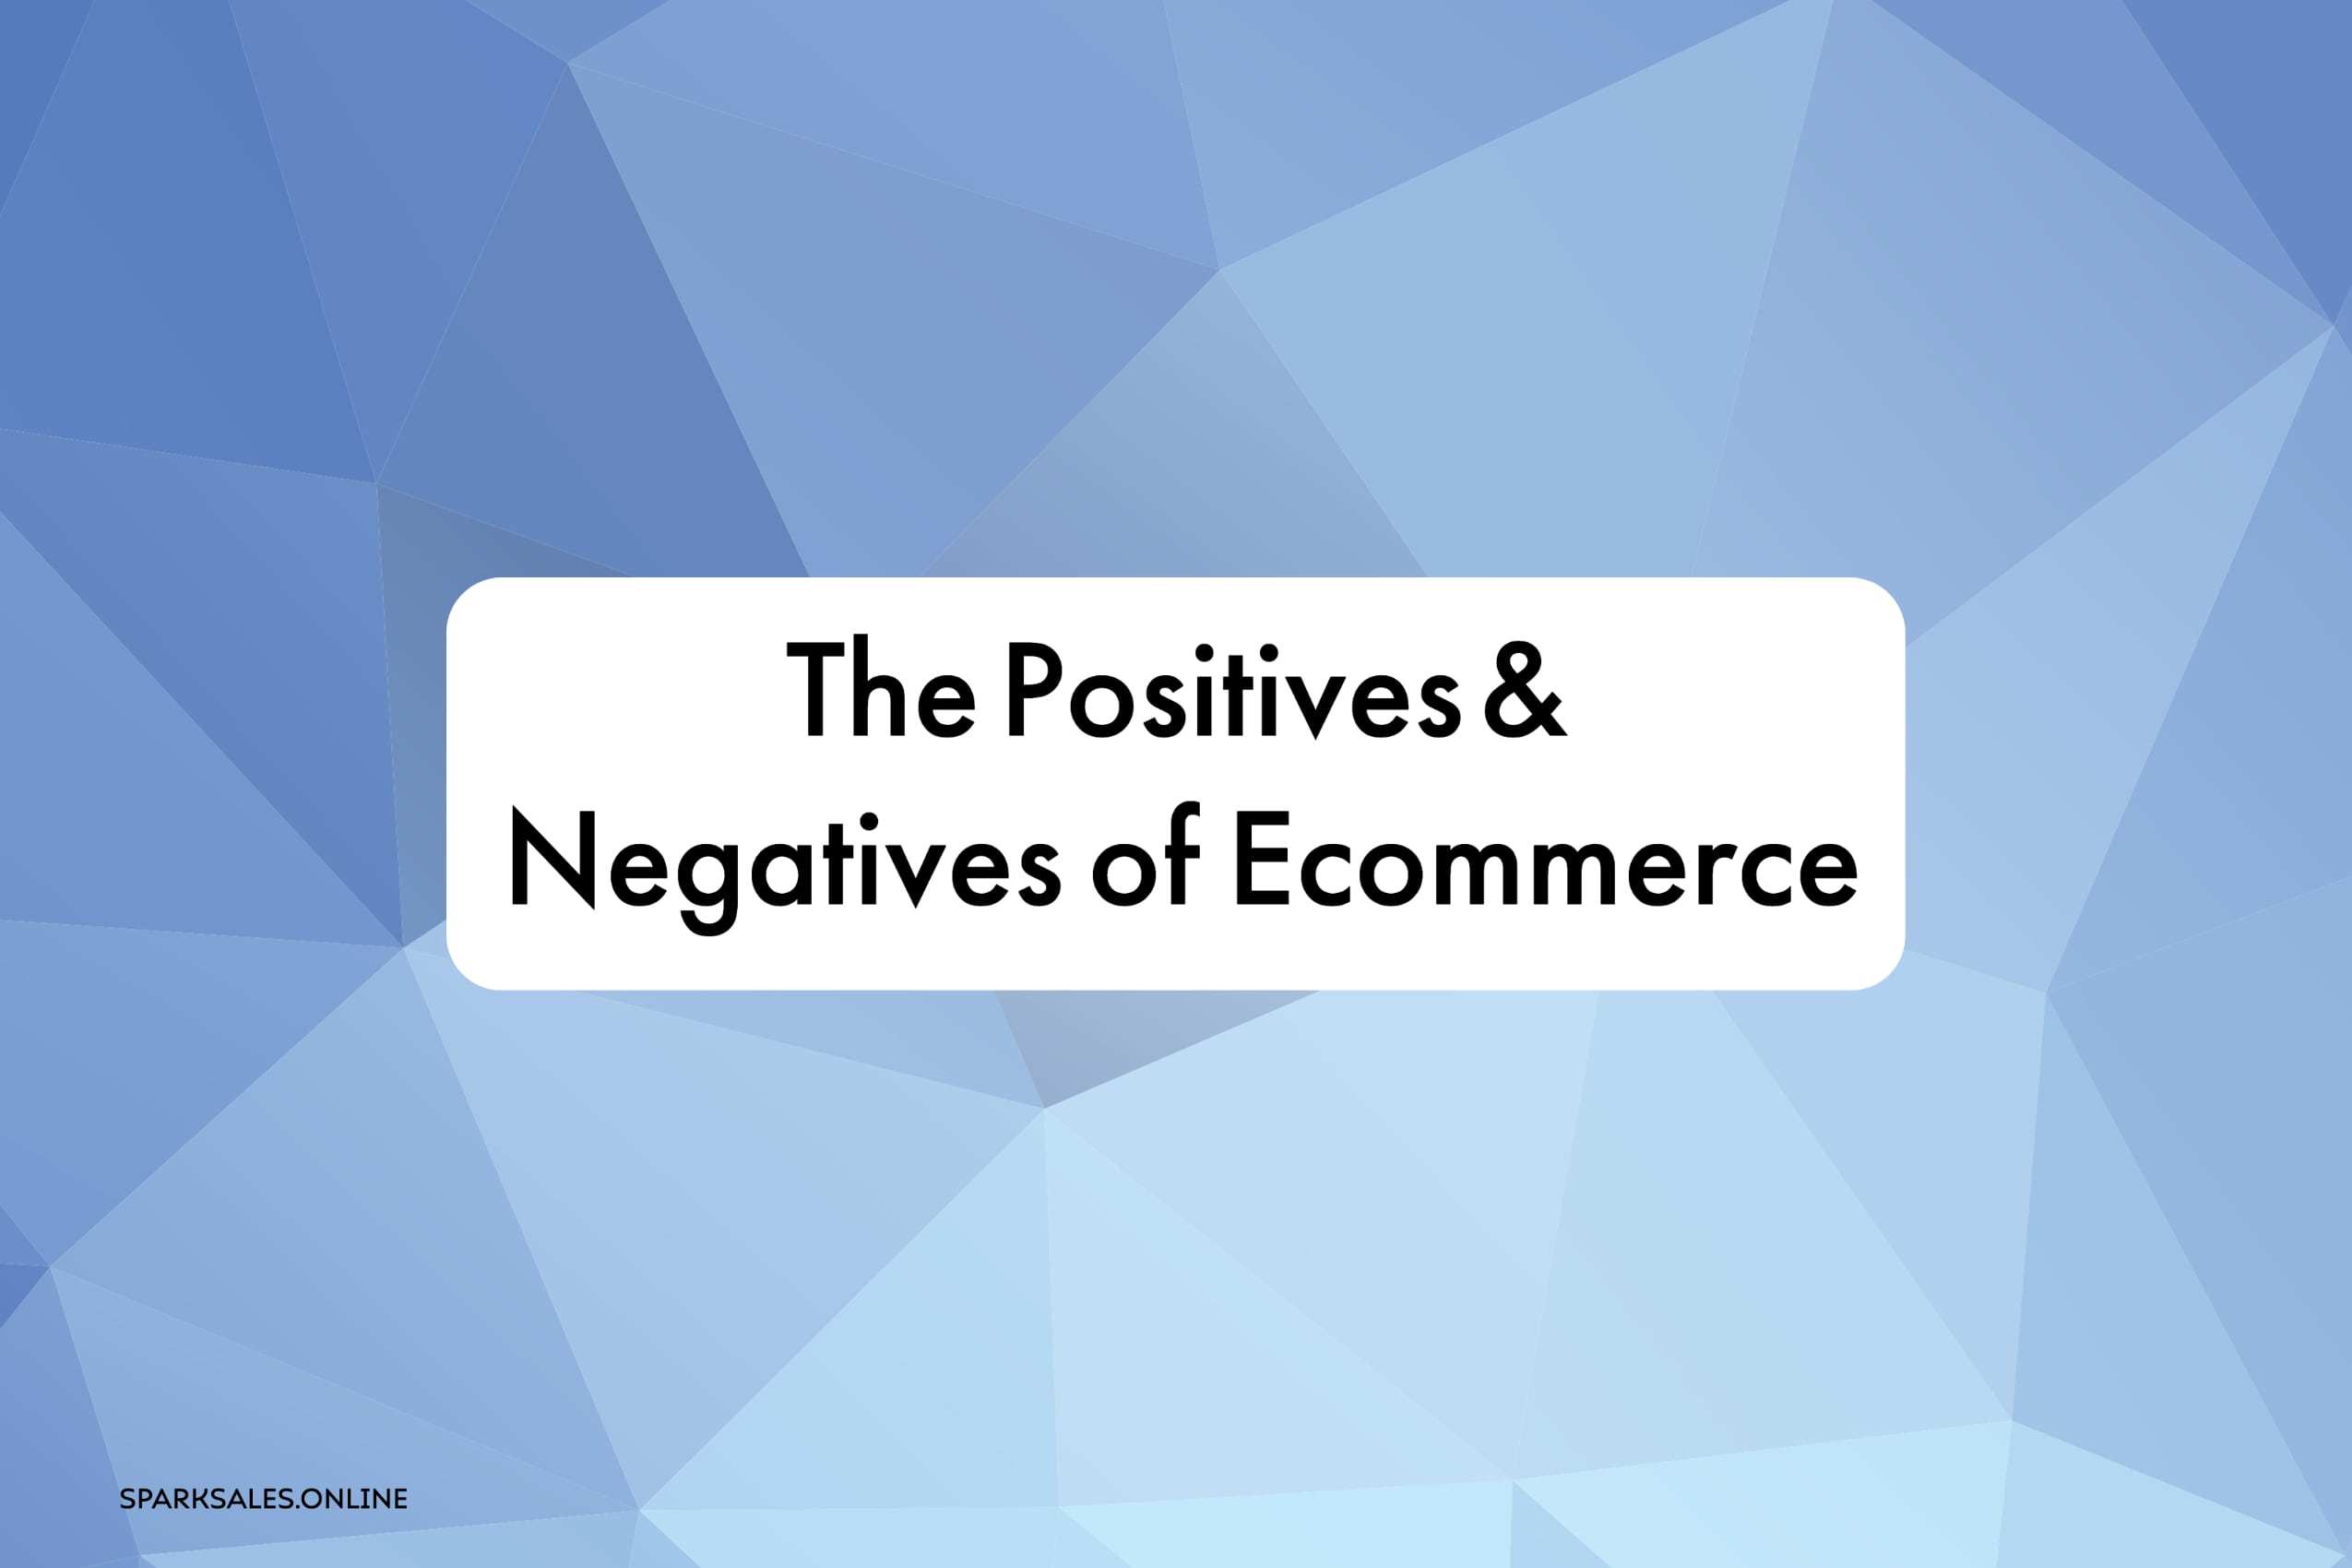 The positives and negatives of ecommerce